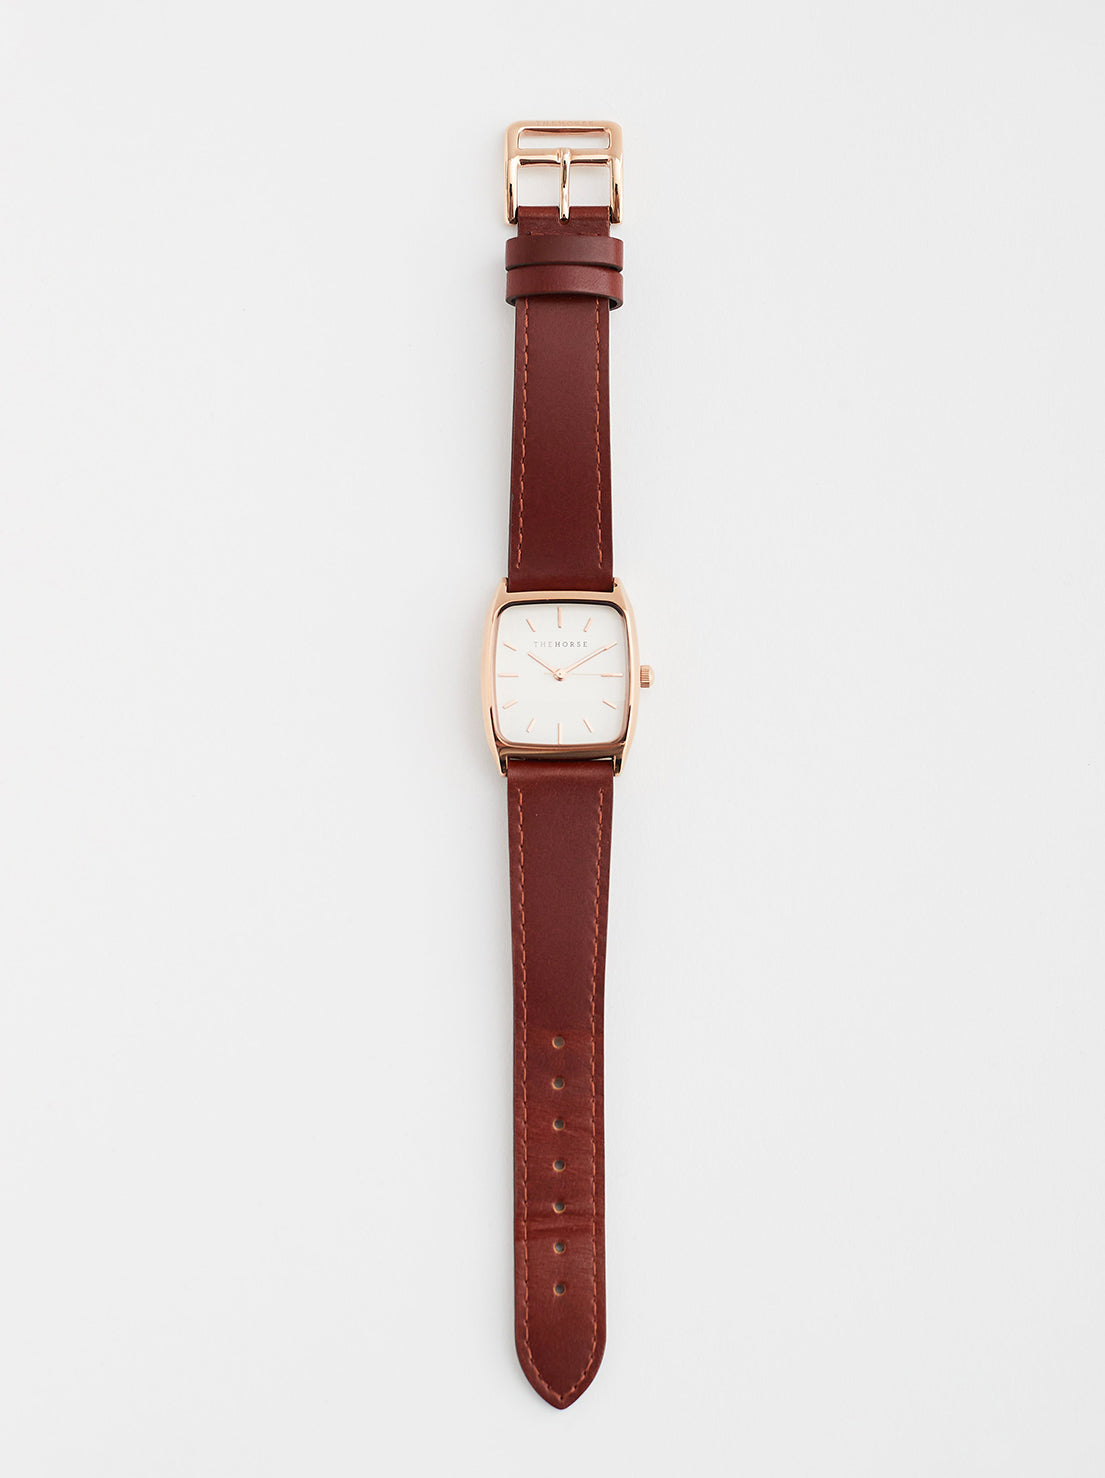 The Horse - The Dress Watch - Rose Gold / White Dial / Walnut Leather